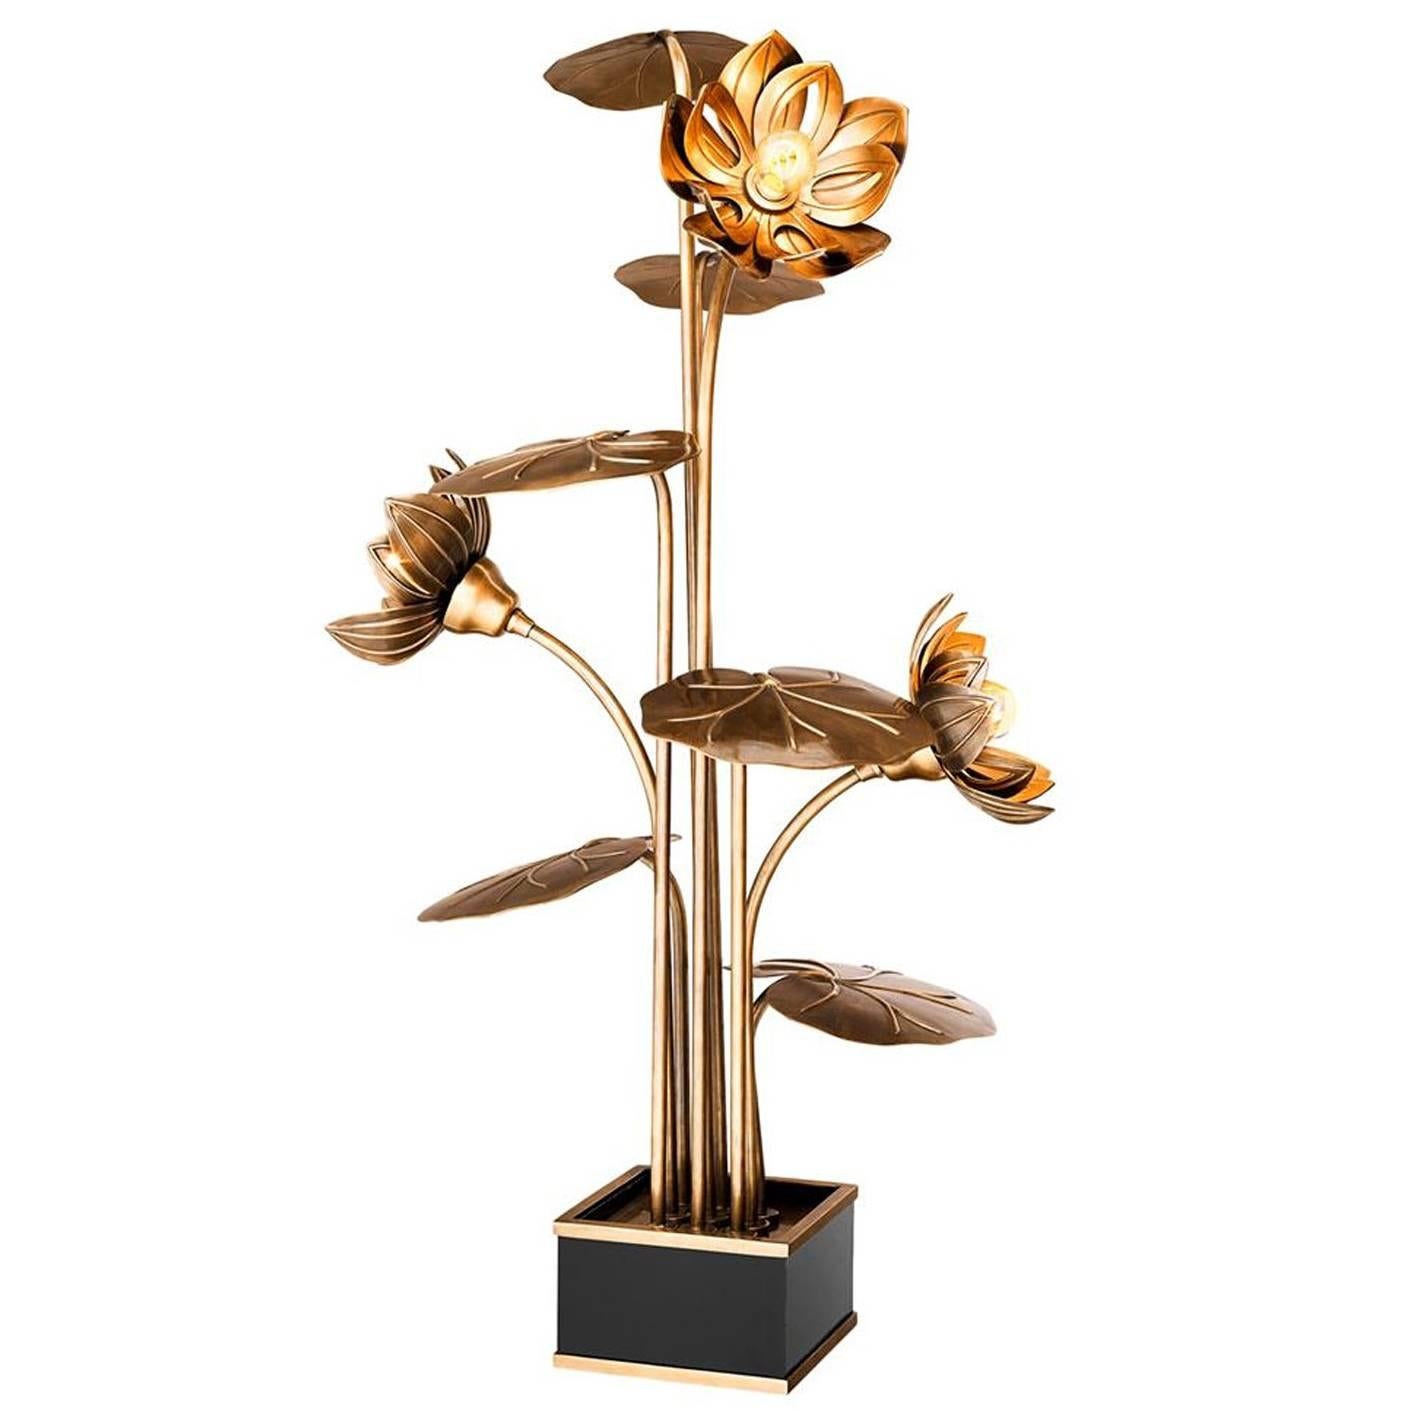 Waterlily Table Lamp in Vintage Brass Finish